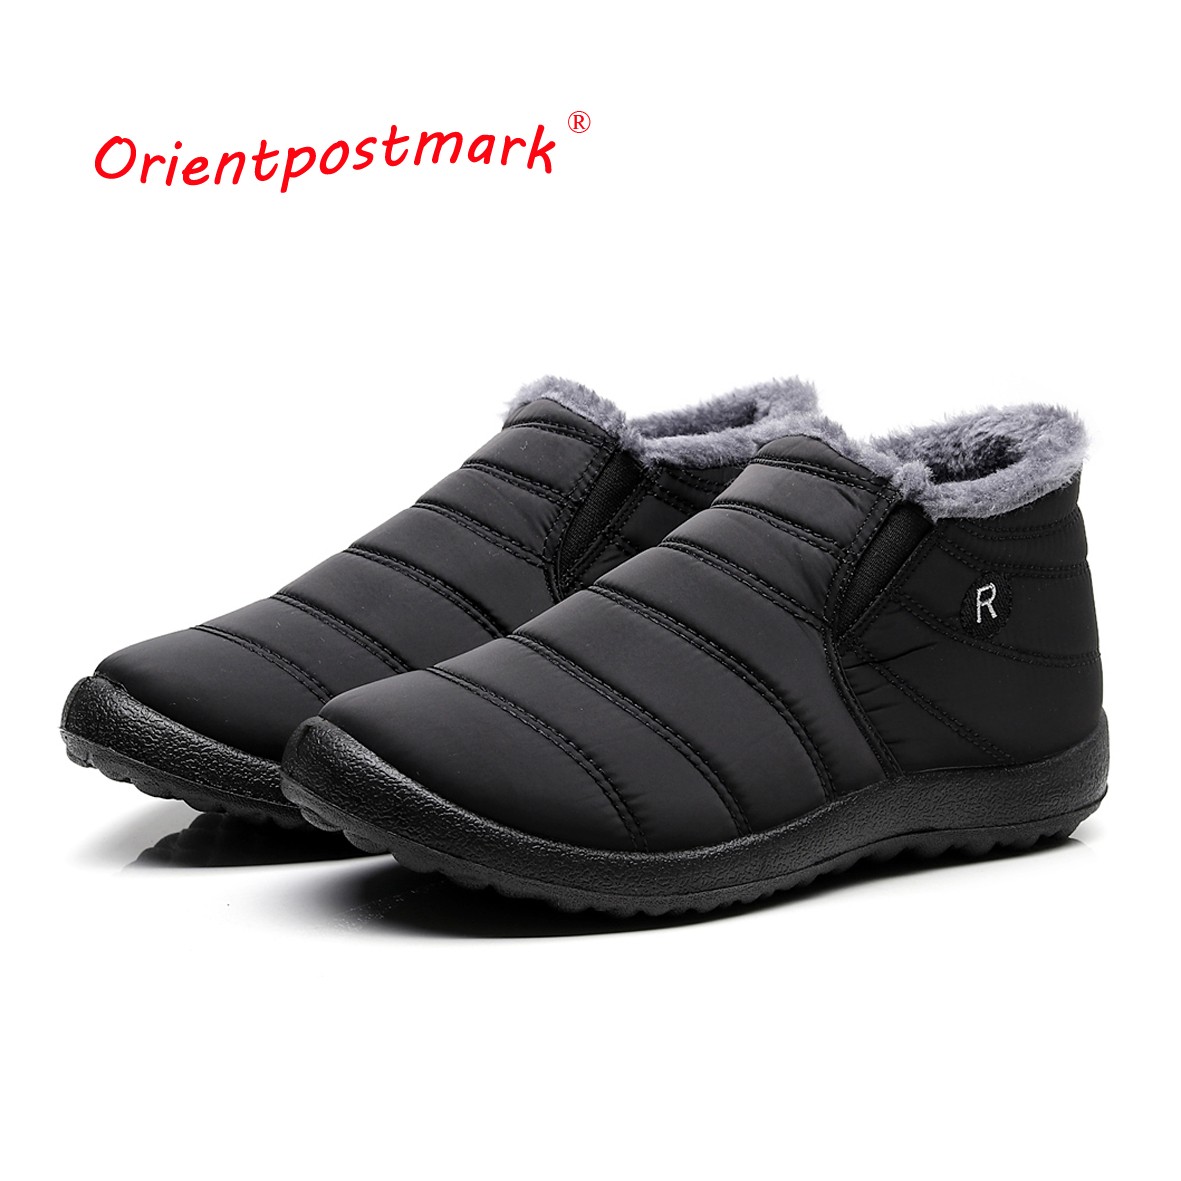 Men's Winter Shoes Unisex Couples New Snow Boots Ankle Boots Solid Color Plush Inside Anti-slip Bottom Warm Waterproof Skating Shoes